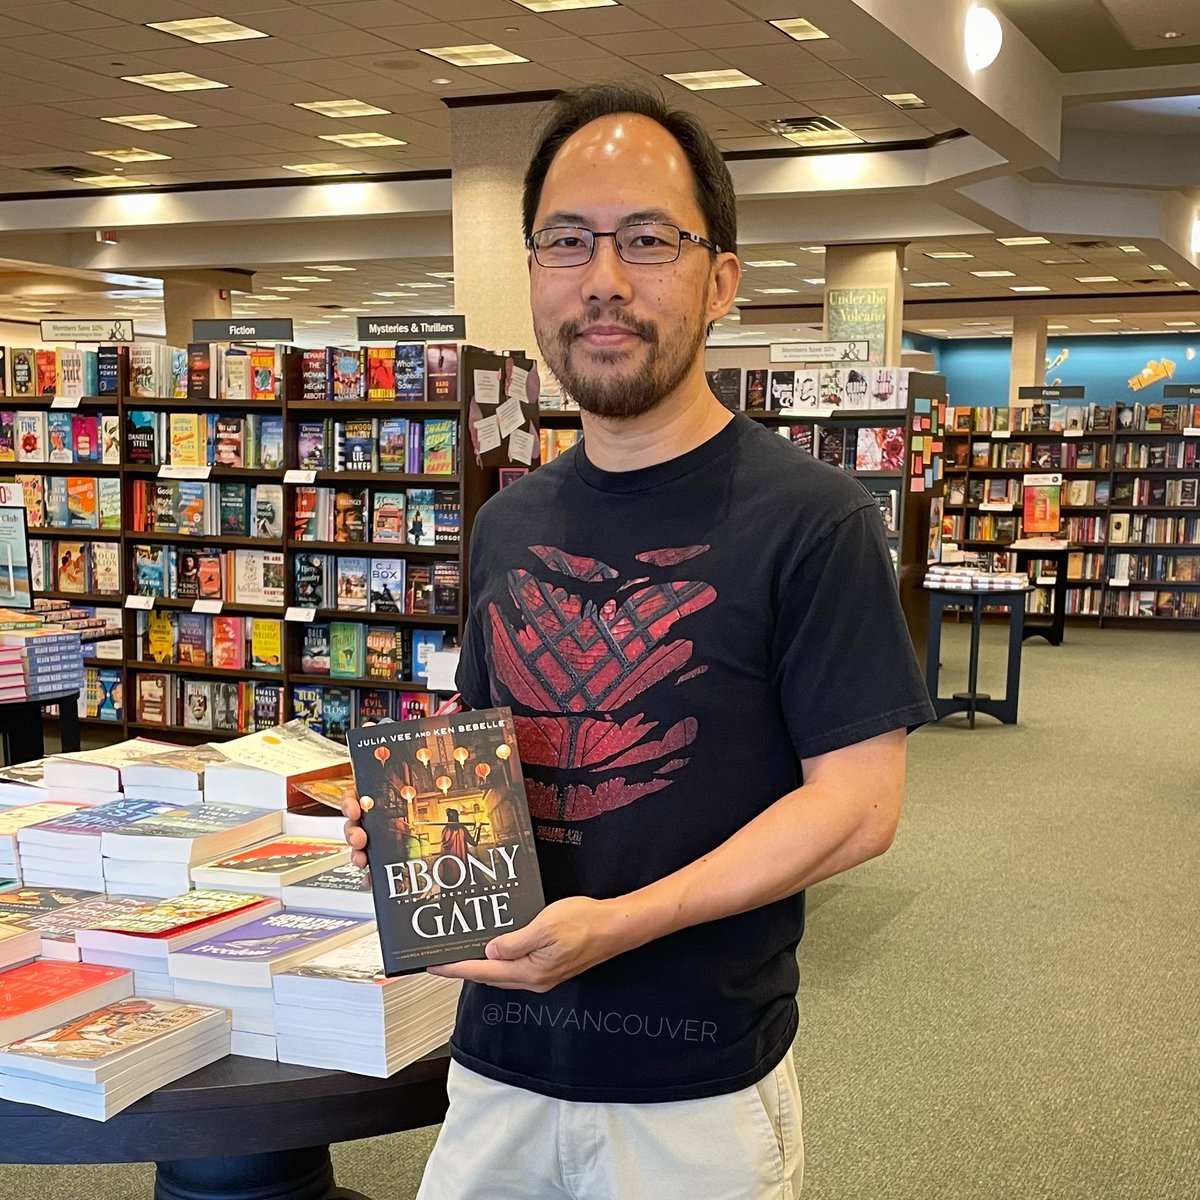 Thanks @kenbebelle for stopping by our store today! We’ve got signed copies of his book, The Ebony Gate! #barnesandnoble #authoralert #kenbebelle #fantasybooks #newbooks #bnvancouver #vancouverusa